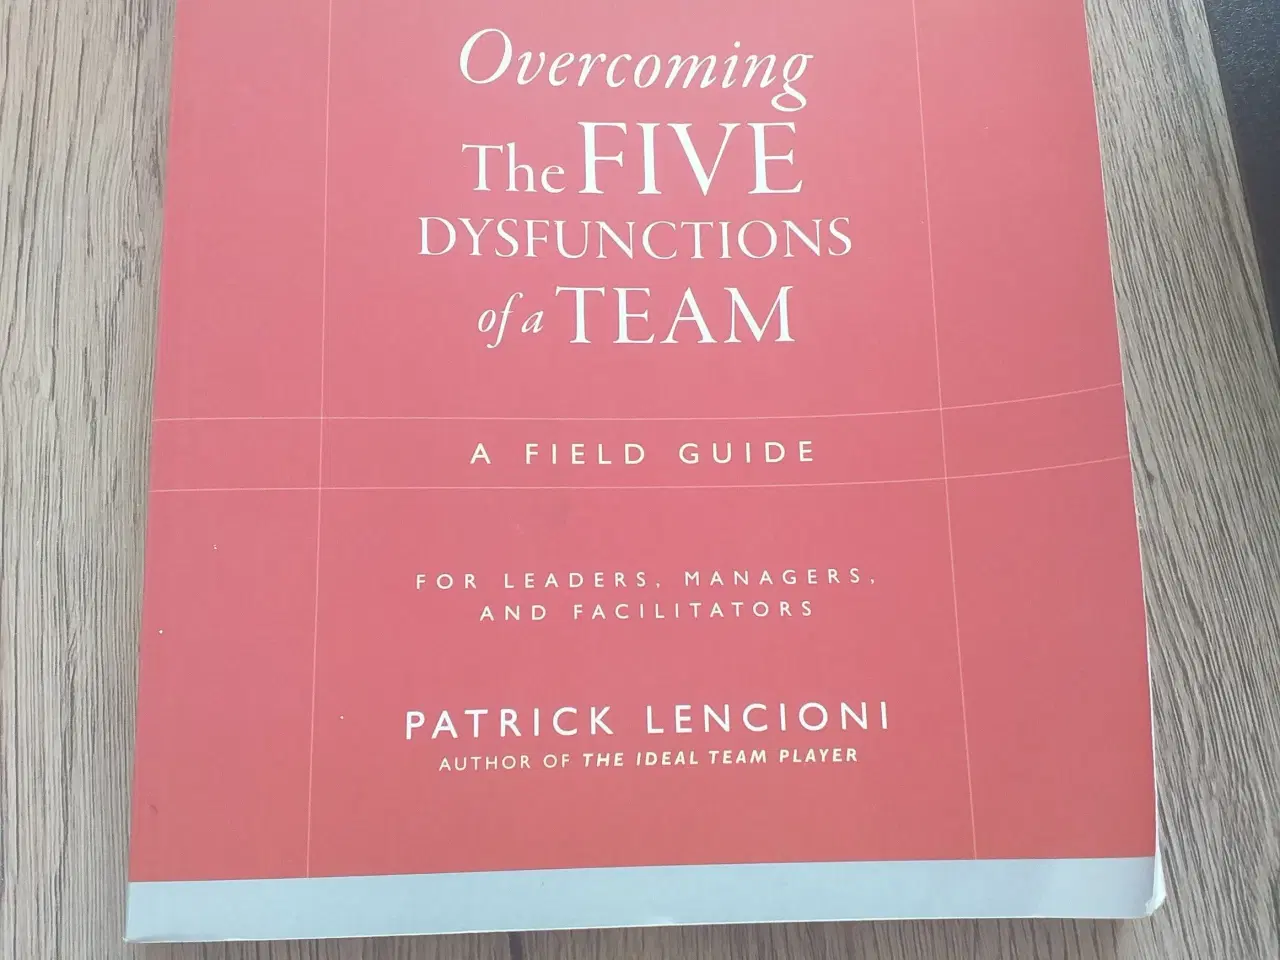 Billede 1 - Overcoming the five dysfunctions of a team